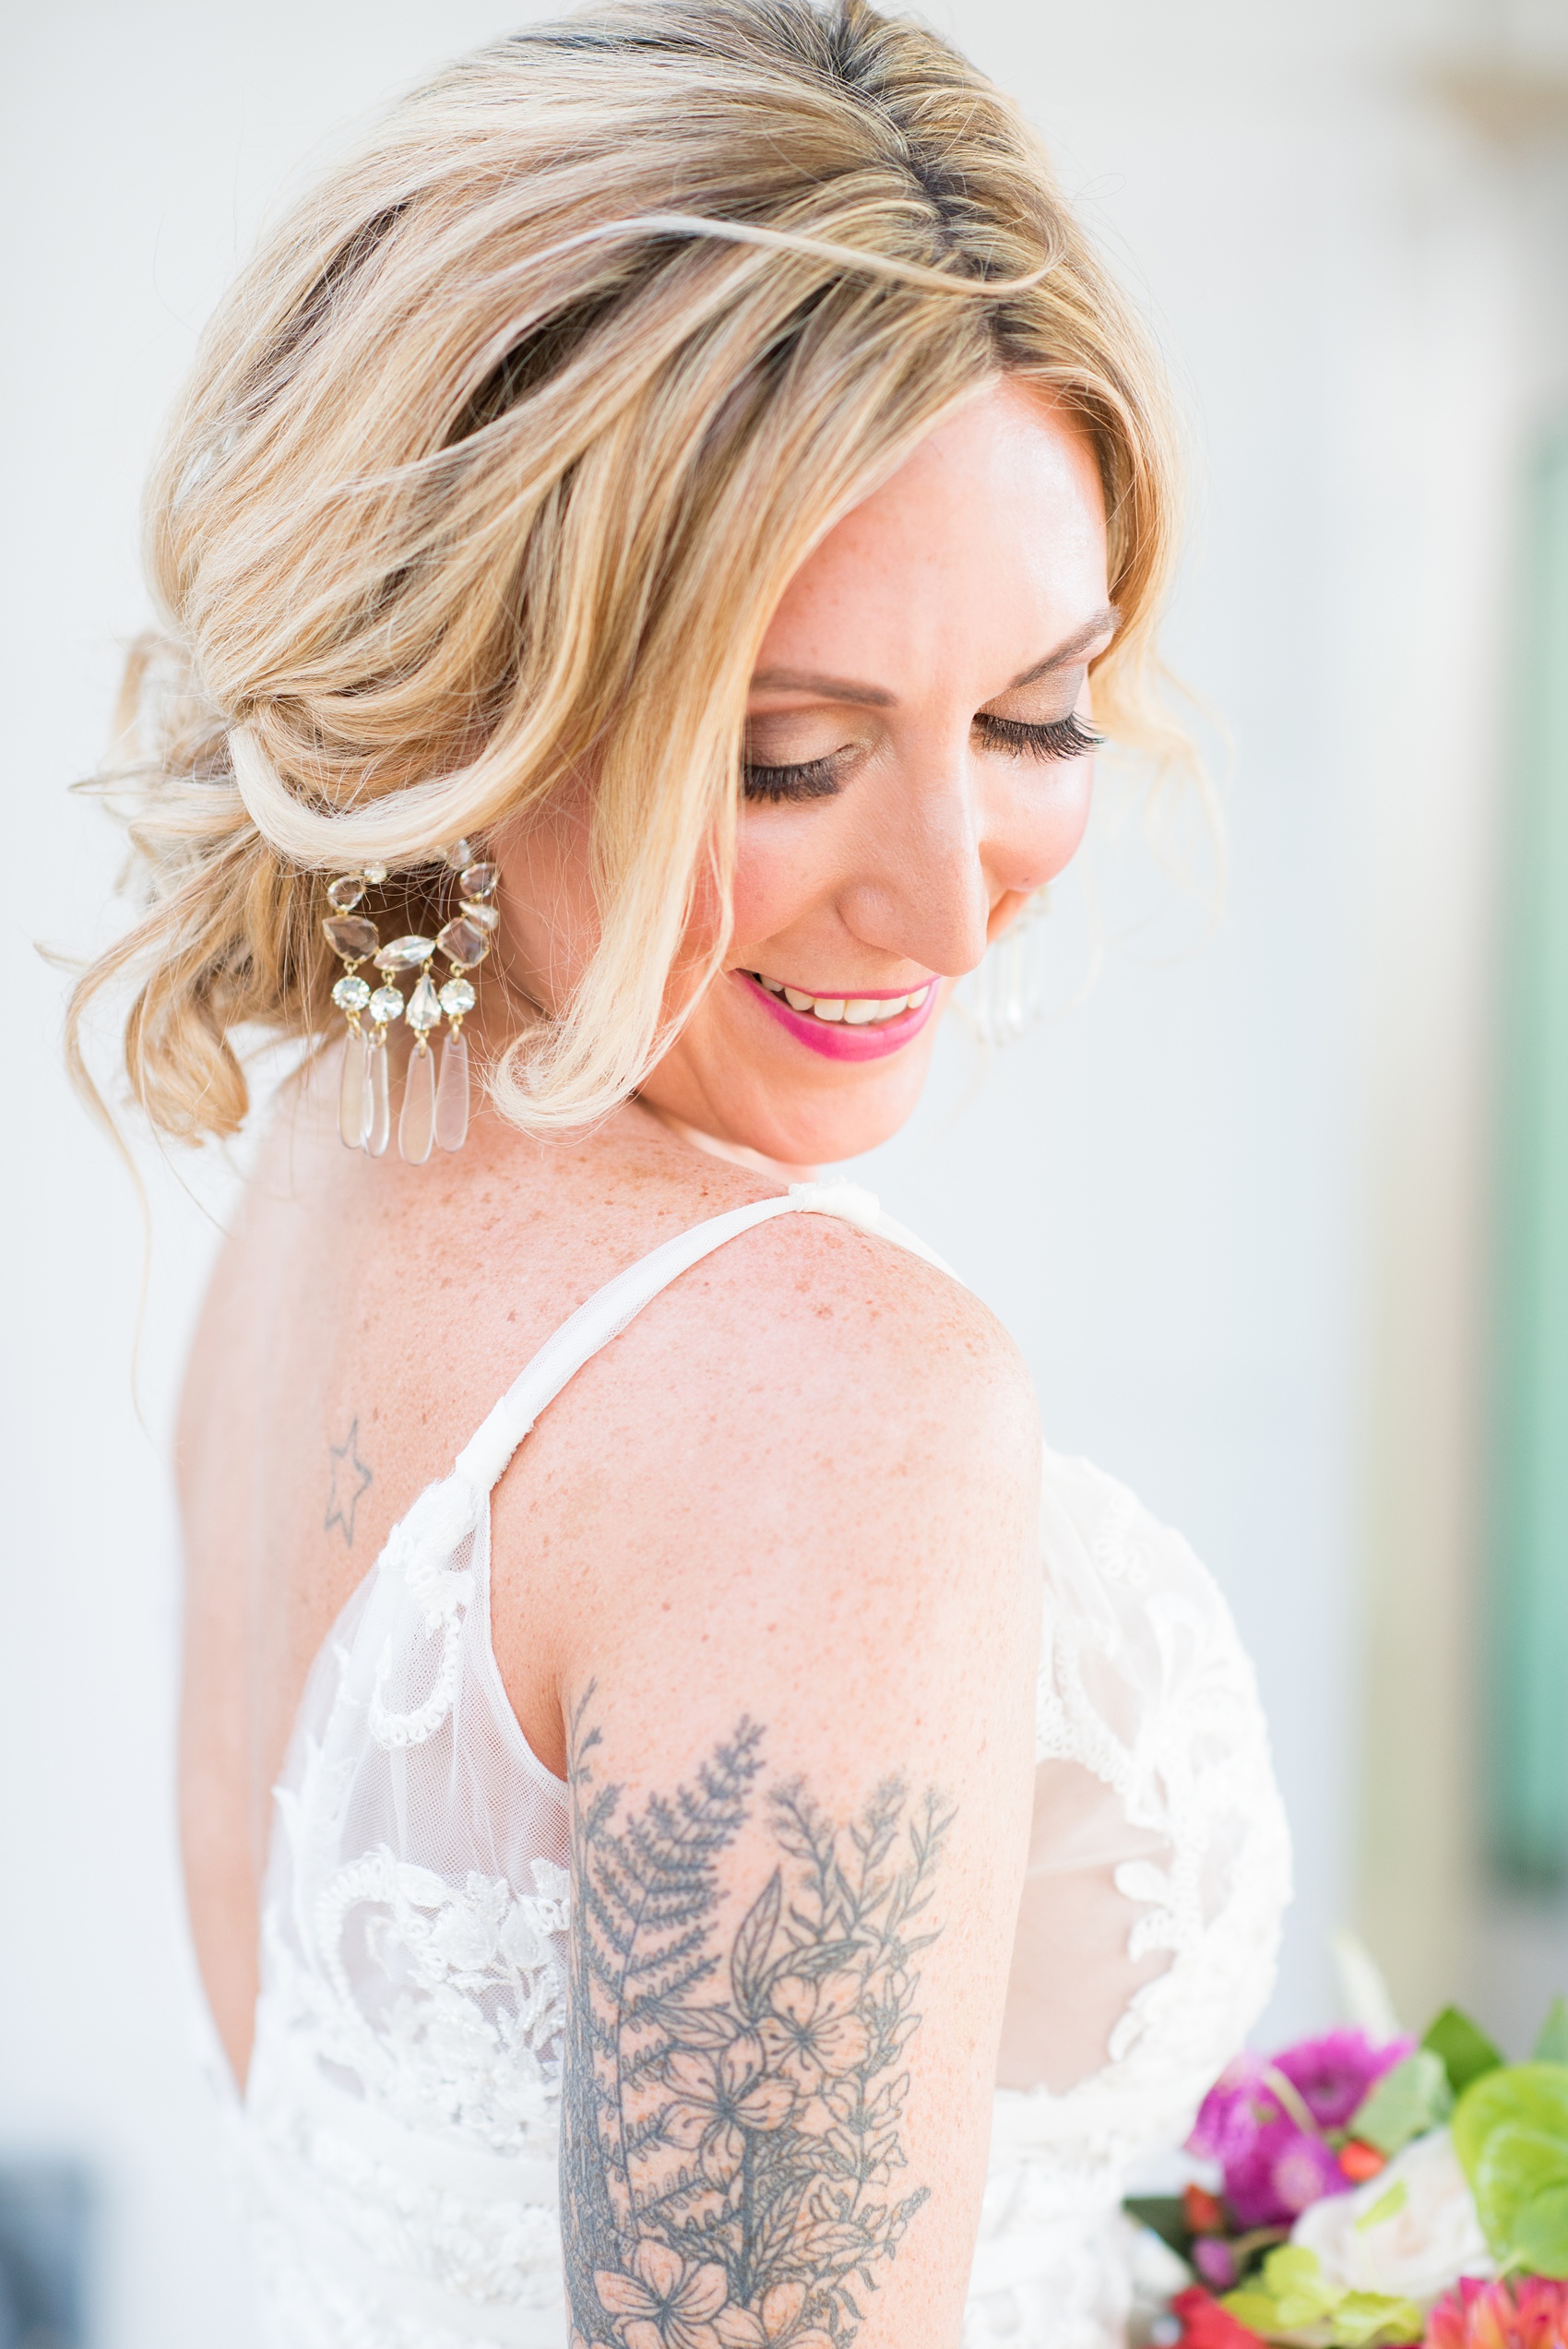 Highgrove Estate wedding photos in North Carolina by Mikkel Paige Photography. This tattooed bride wore a lace gown and her style beautiful personality matched her awesome reception details. They had a pink + green palette, planned by @asouthernsoiree, with tropical flowers + floral patterns on custom stationery. Click through for beautiful ideas for their outdoor party! #NorthCarolinaVenues #WeddingVenues #MikkelPaige #ASouthernSoiree #tropicalflowers #bridestyle #tattooedbride #bride